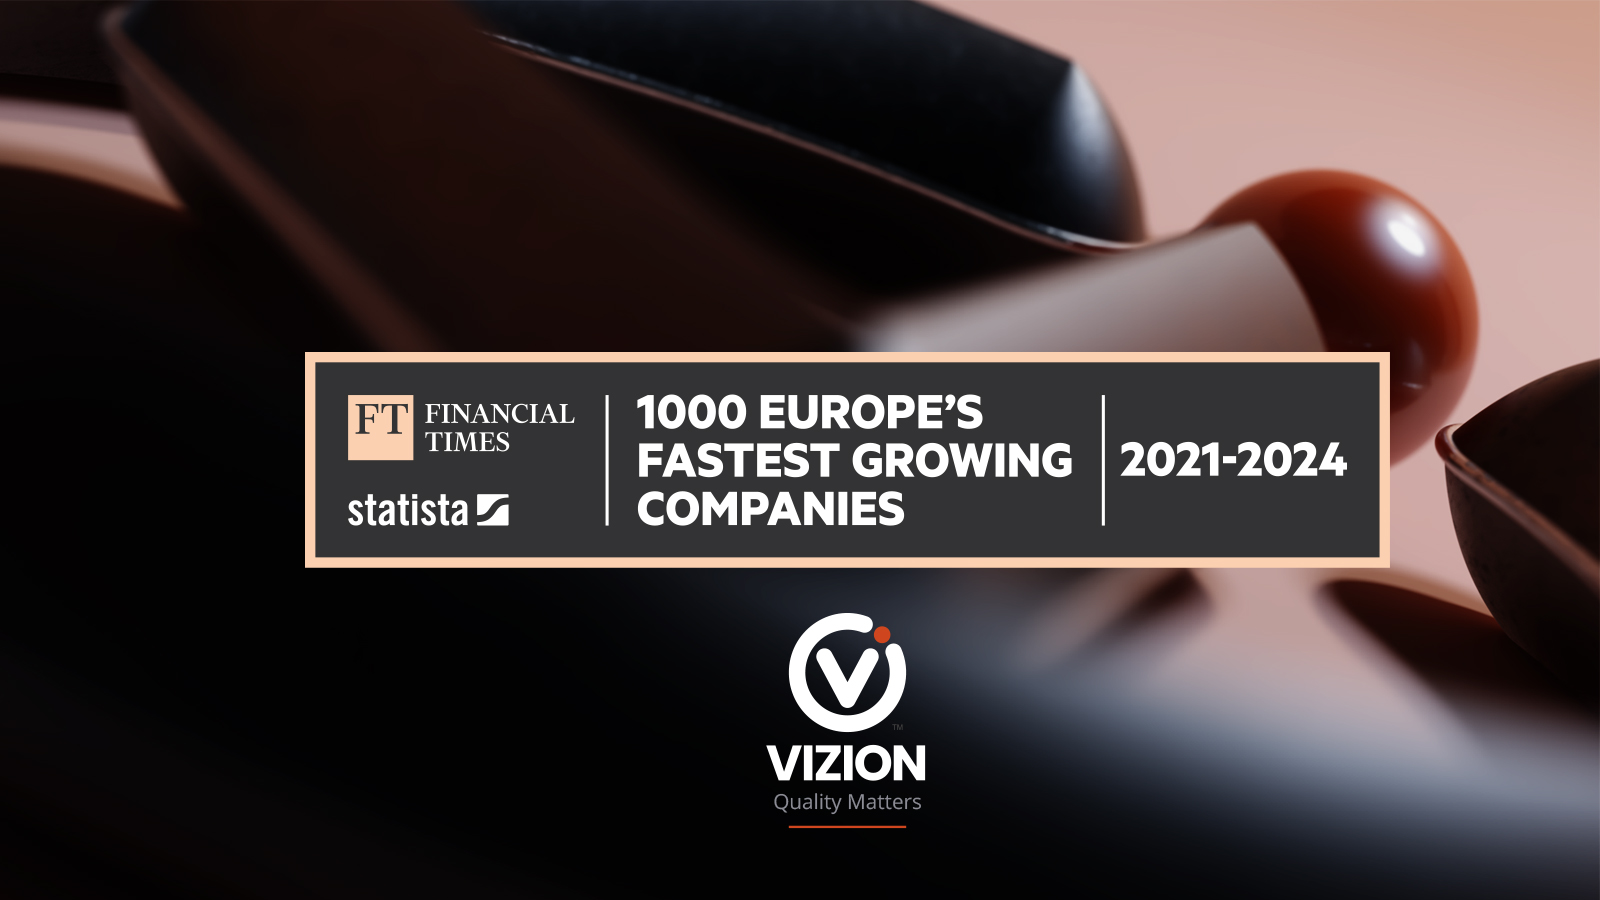 The Financial Times recognise Vizion Network as one of Europe’s Fastest Growing Companies for the Fourth Consecutive Year